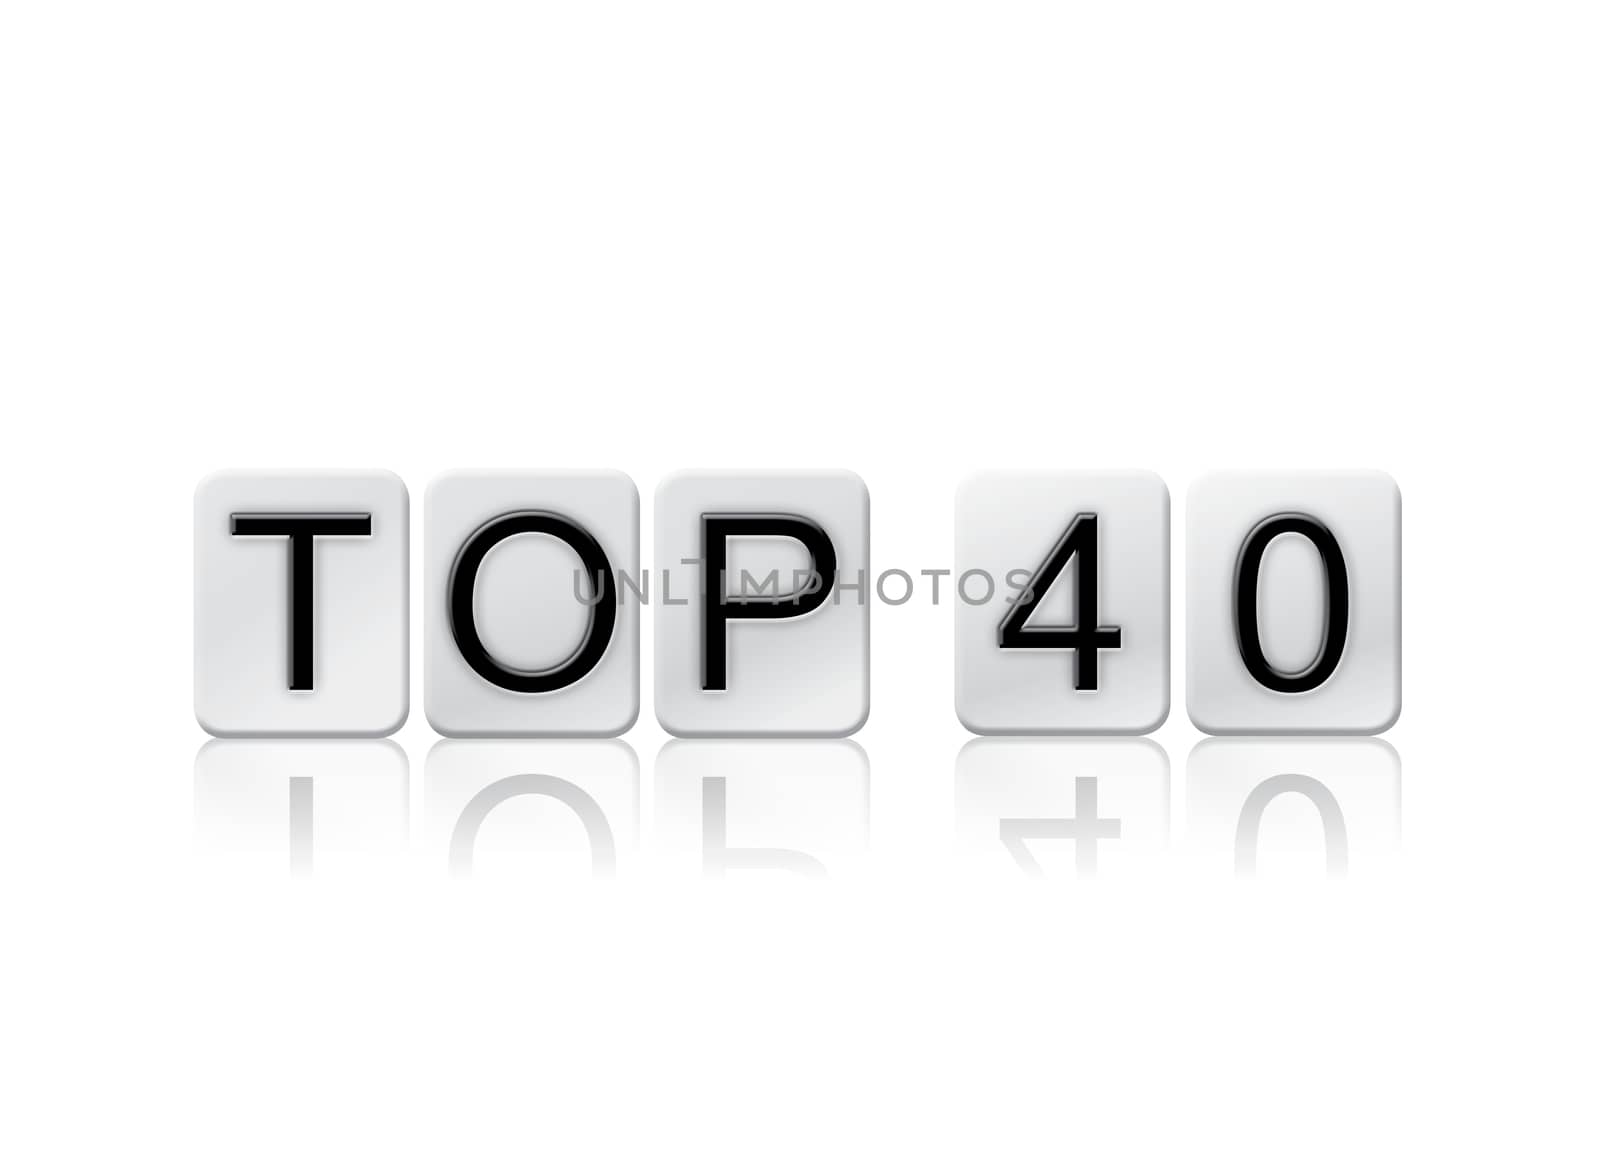 The word "Top 40" written in tile letters isolated on a white background.